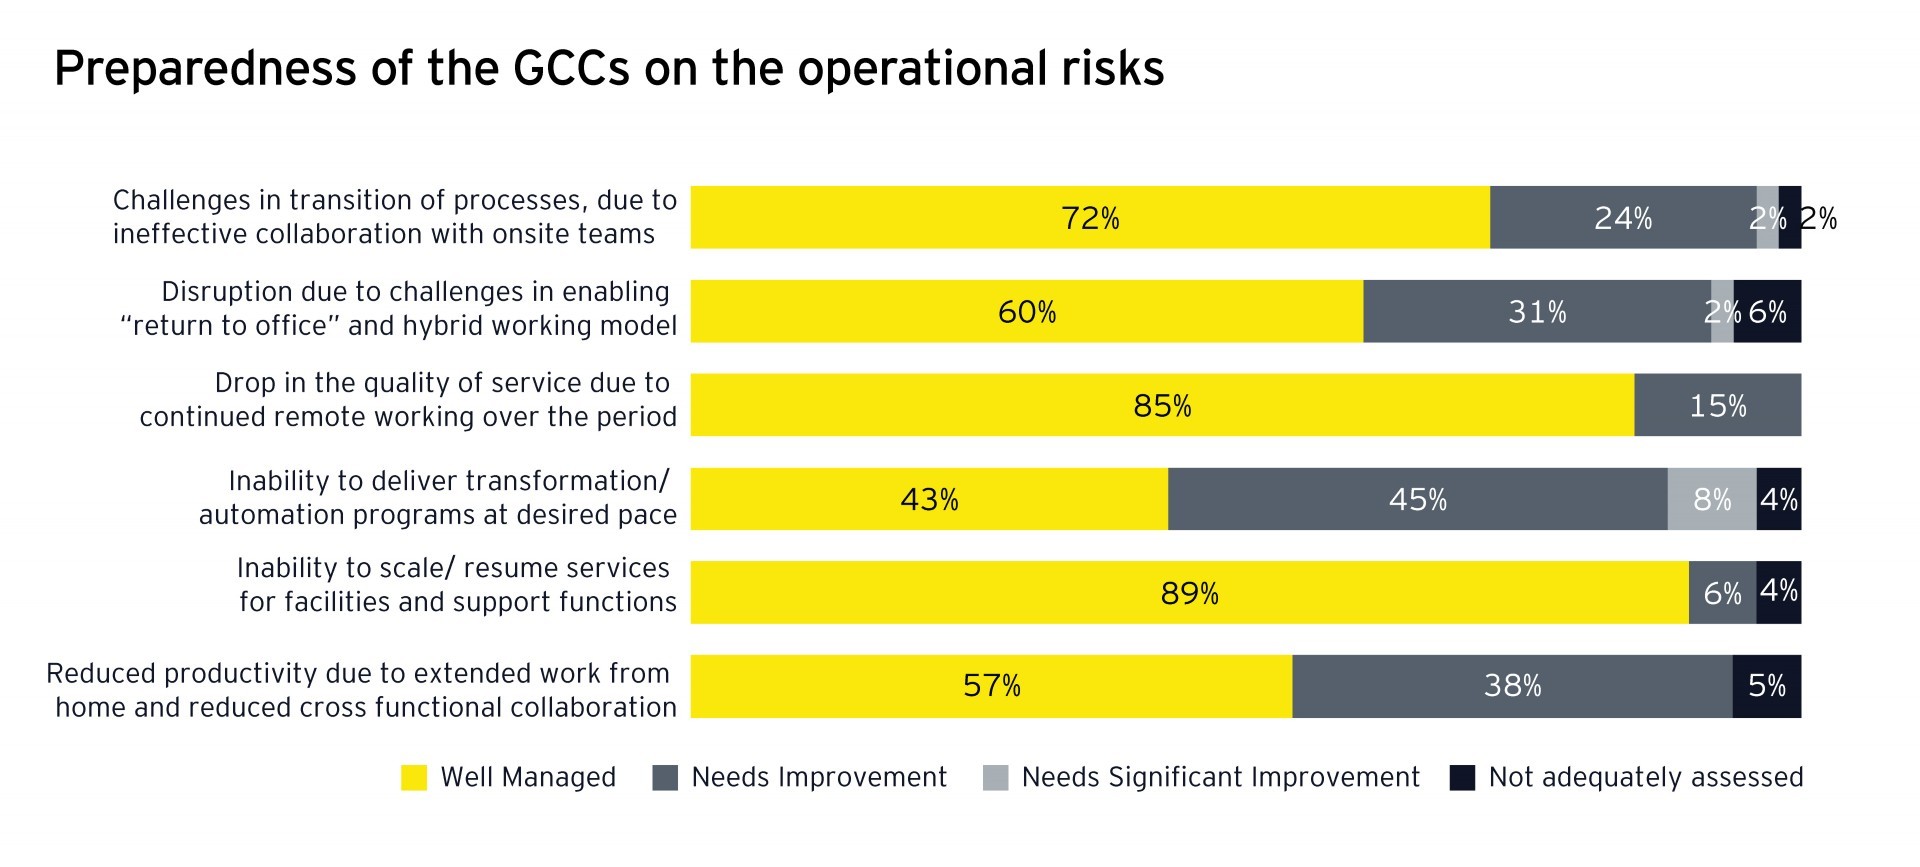 Preparedness of the GCCs on the operational risks